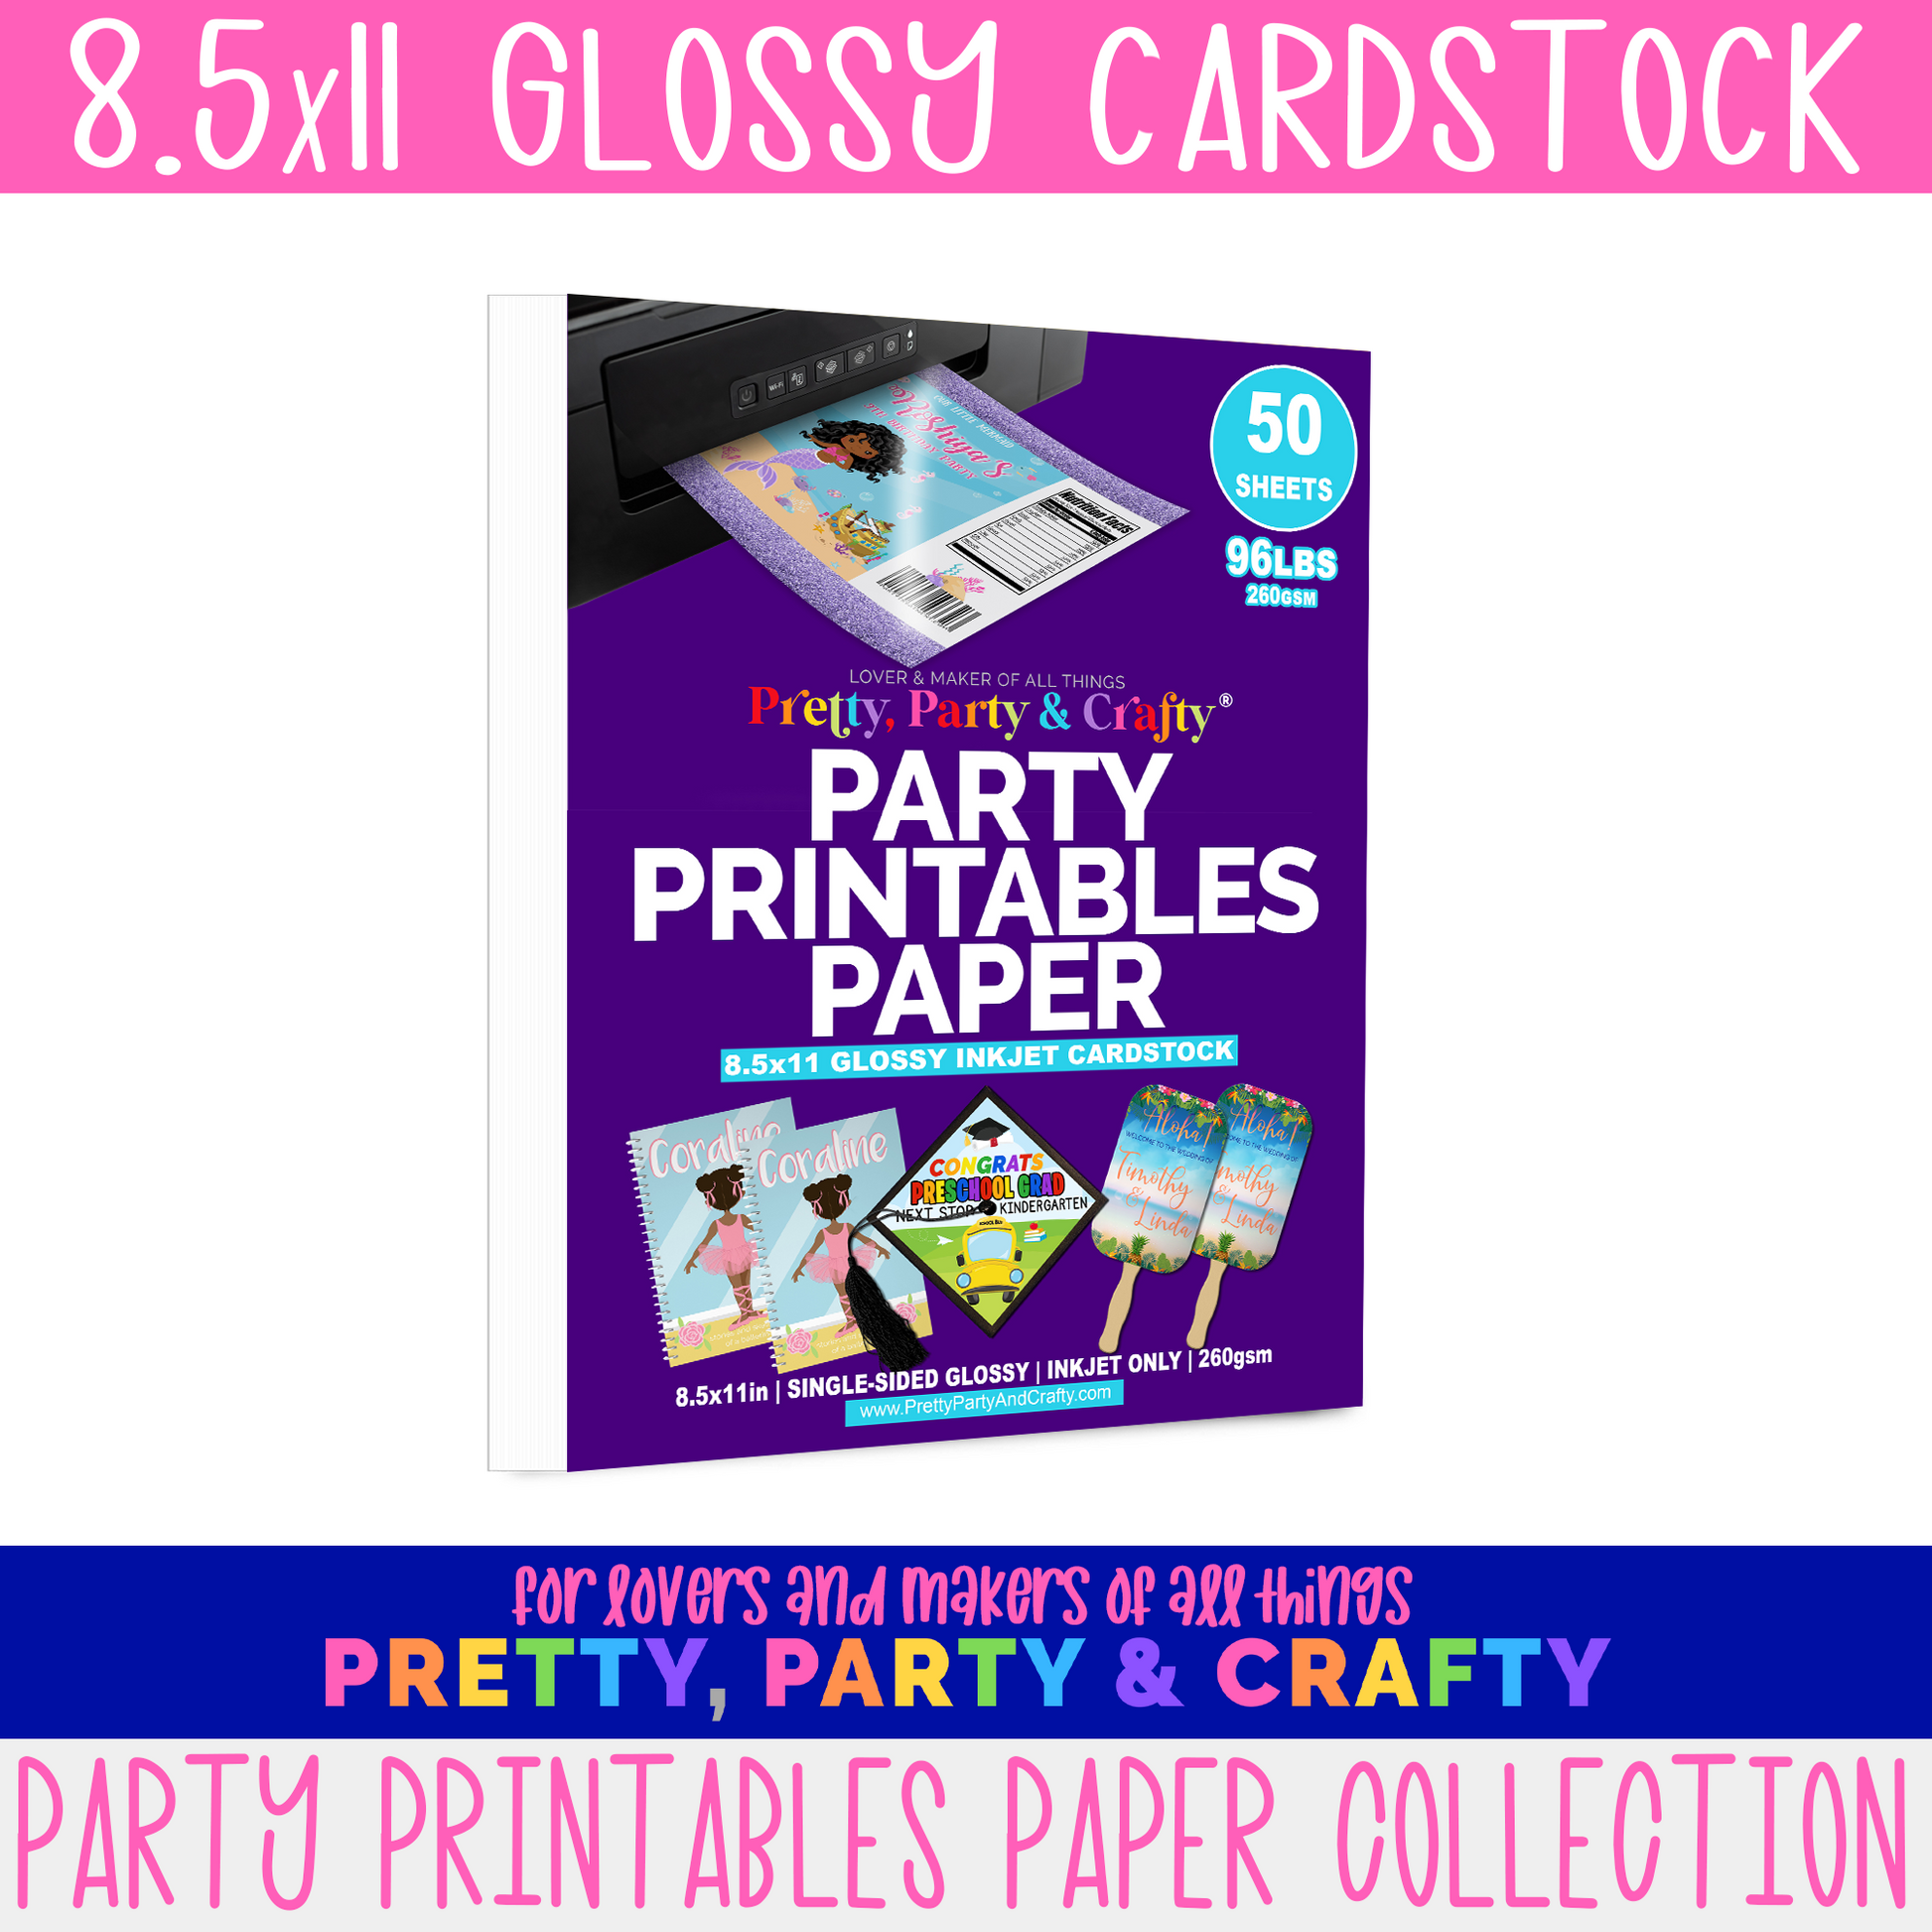 8.5x11 GLOSSY CARDSTOCK 96lbs – INKJET ONLY – Pretty Party and Crafty